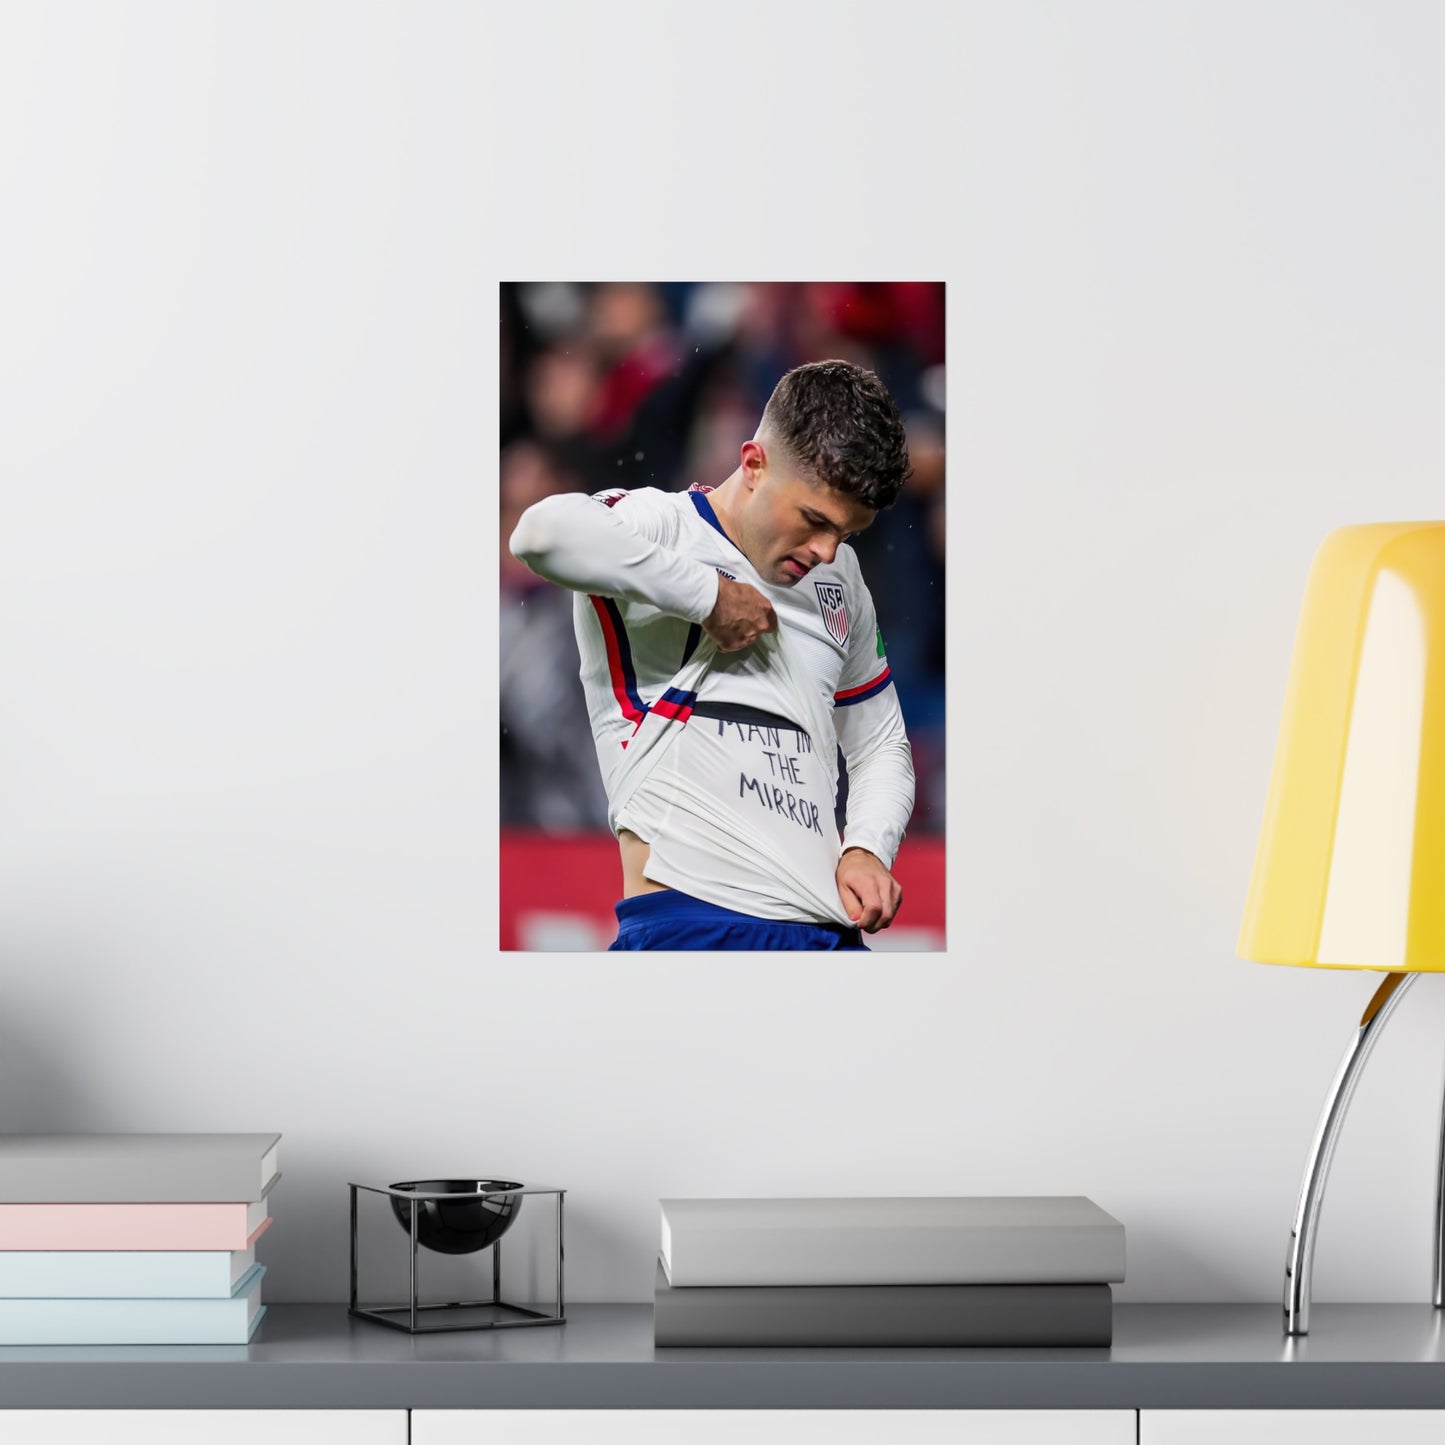 Christian Pulisic 'Man In The Mirror' Shirt Celebration vs Mexico Poster